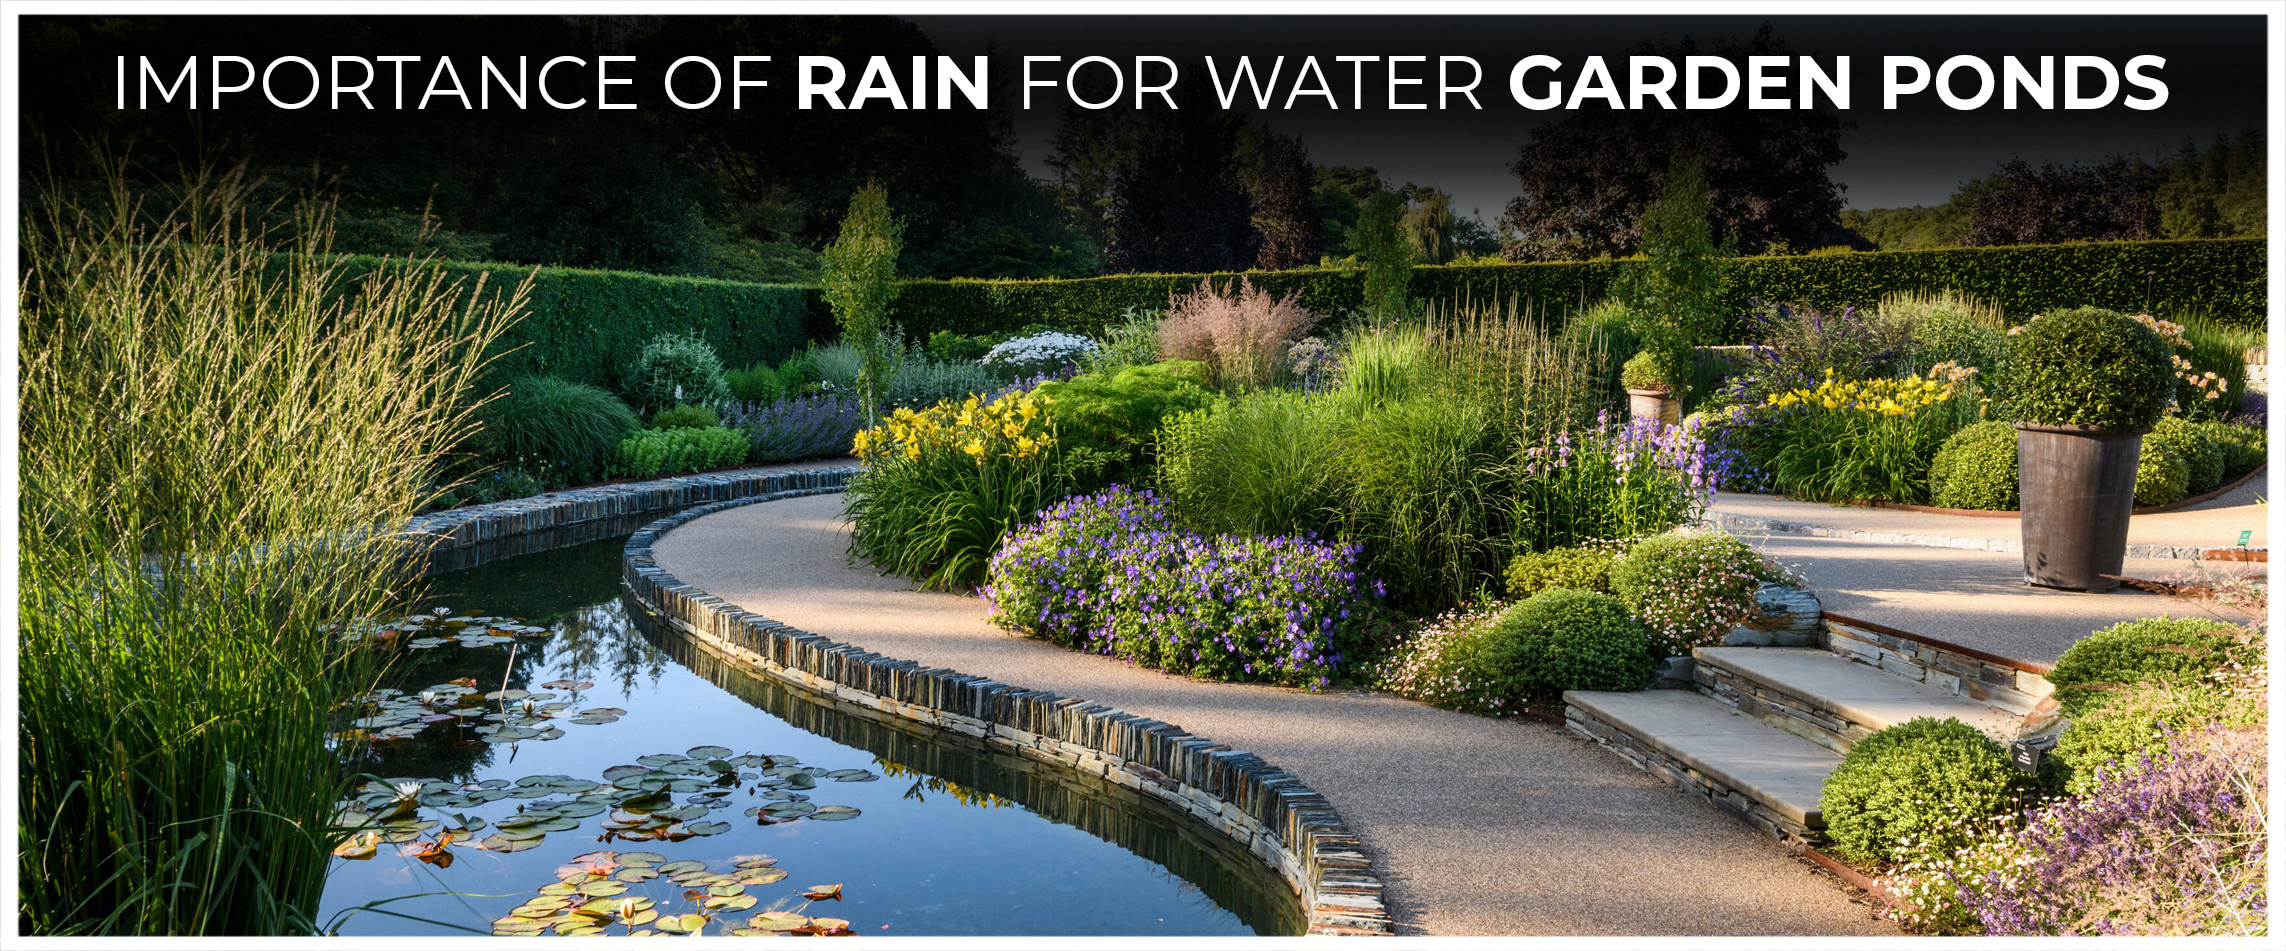 Importance of Rain for Water Garden Ponds